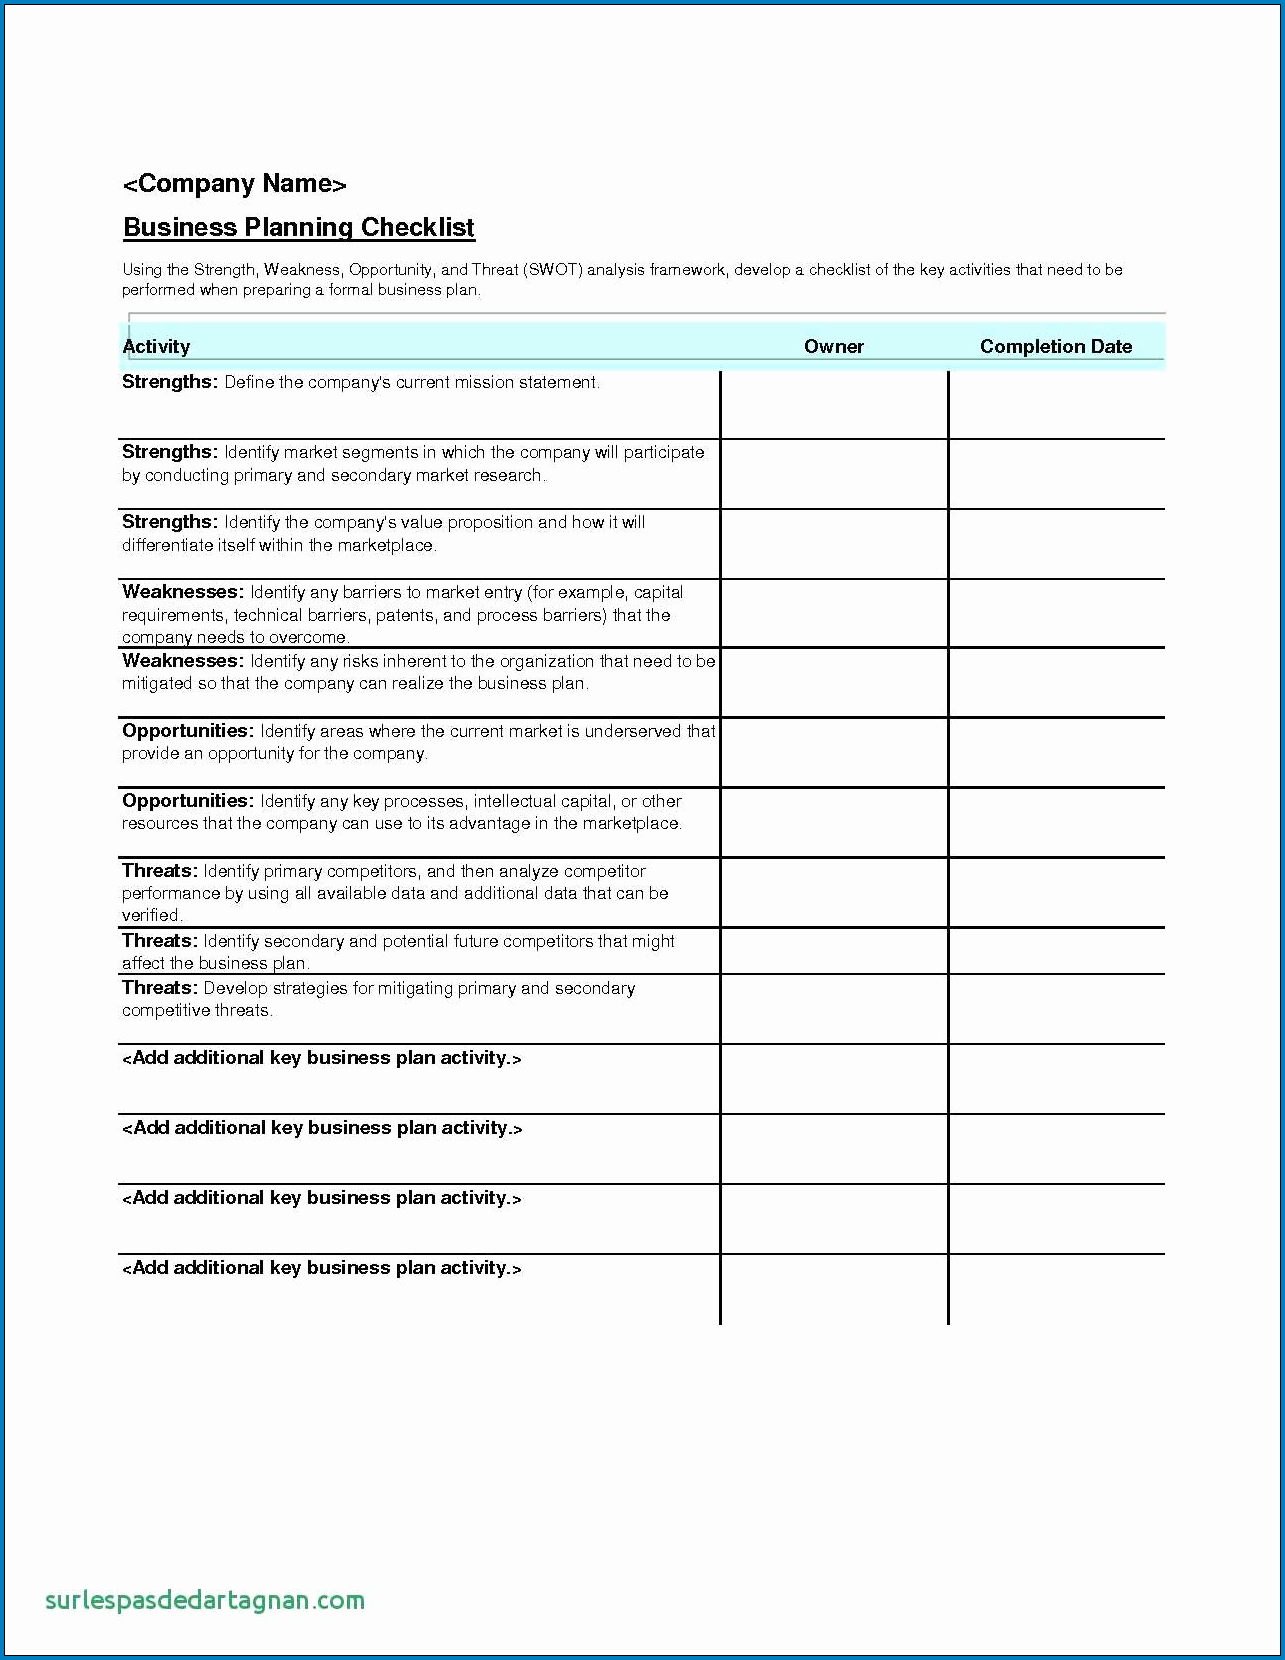 Corporate Event Planning Checklist Template Example